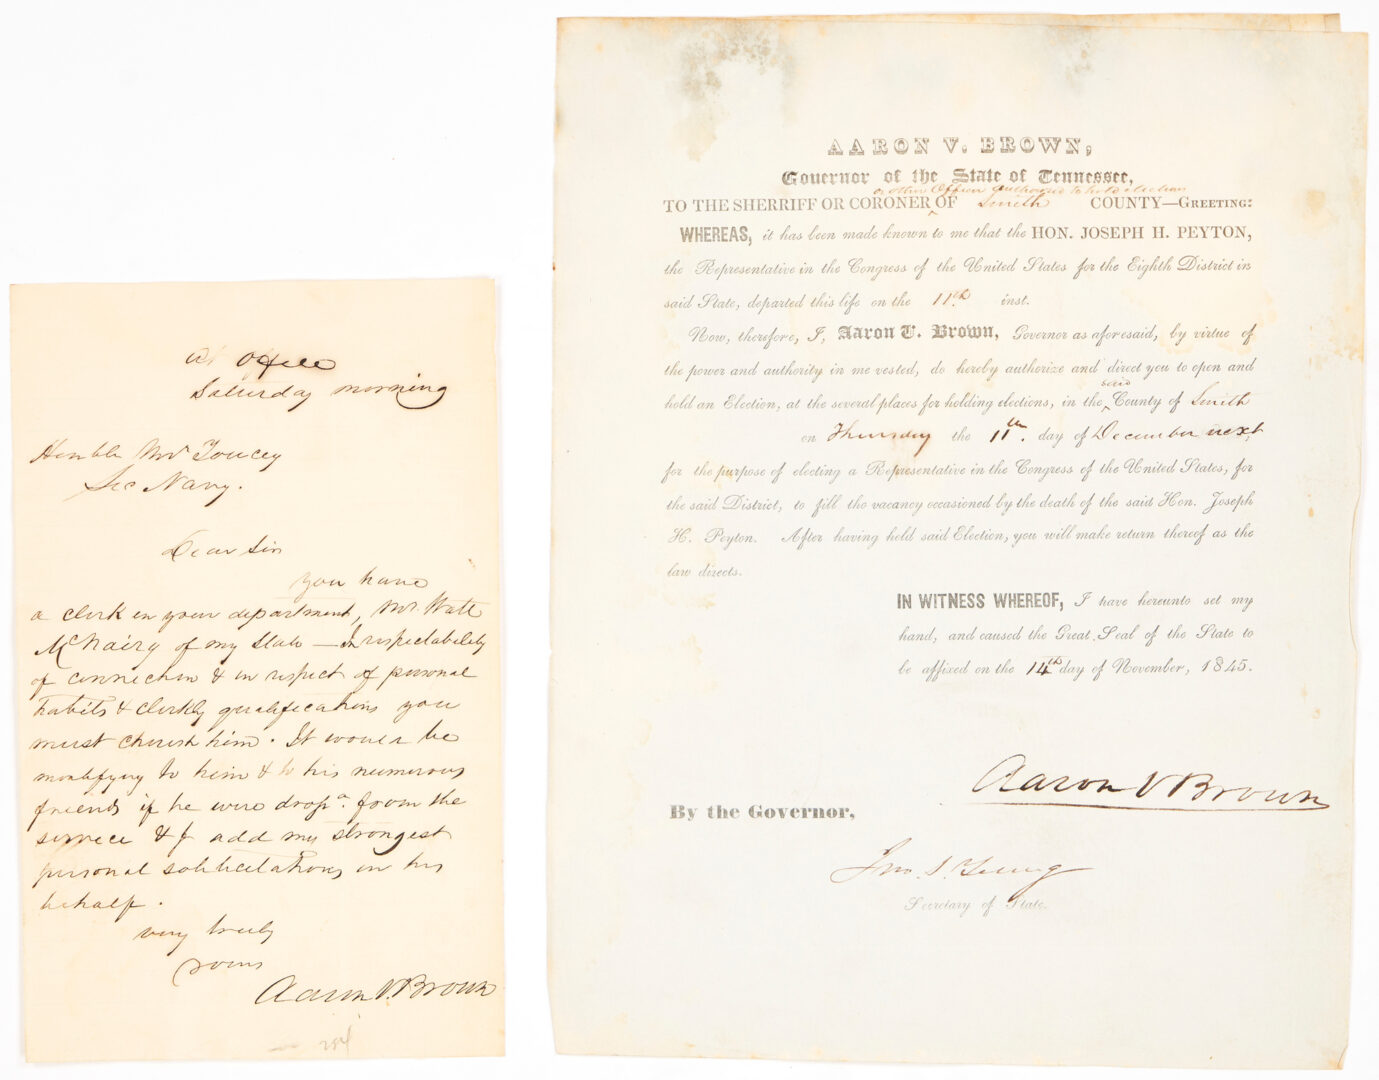 Lot 631: 16 TN Governor Signed Letters & Documents, incl. Willie Blount, Archibald Roane, Joseph McMinn, Wm. Carroll